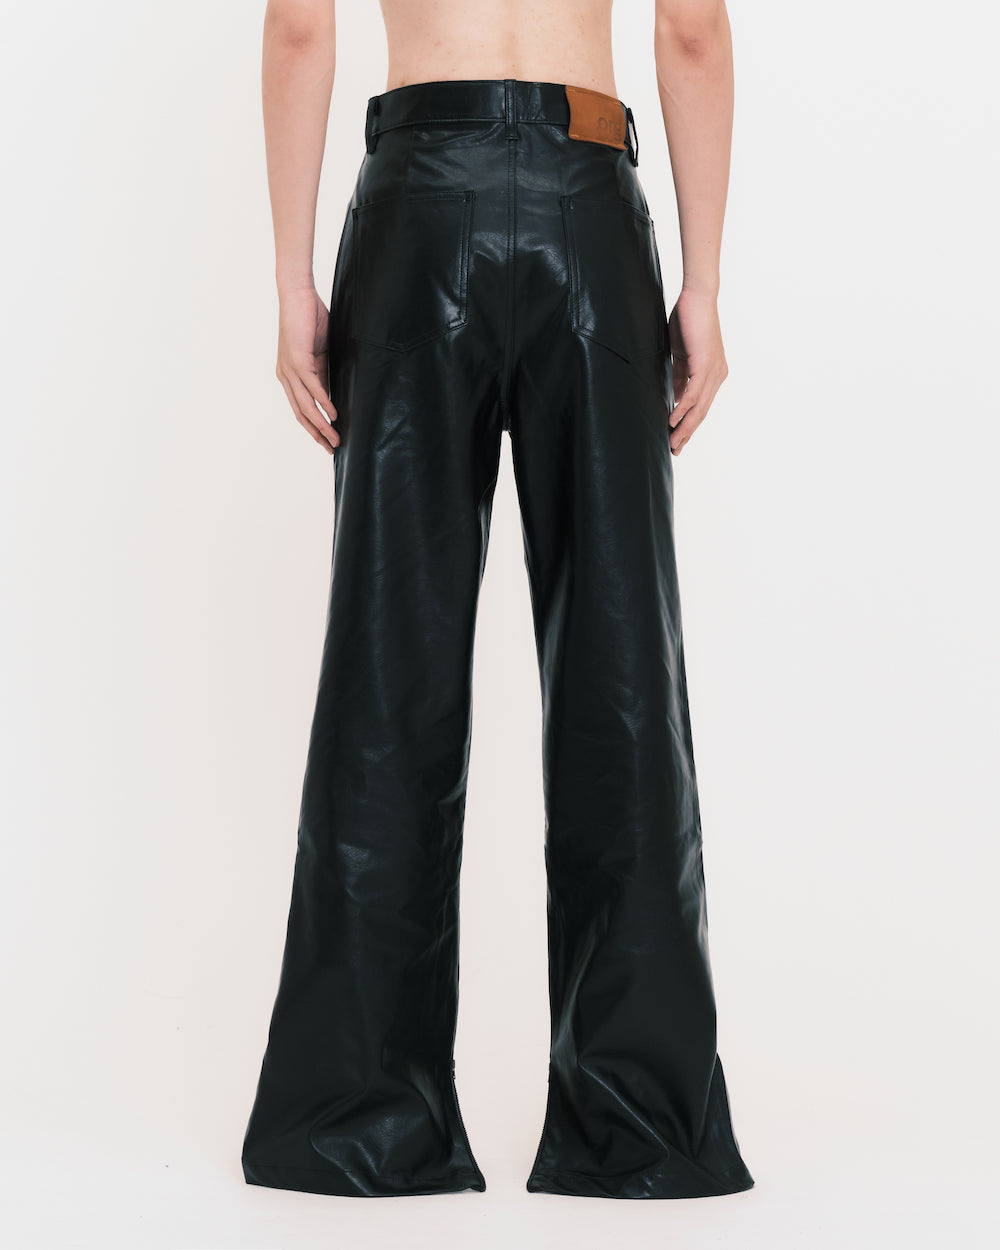 RS 1989 Leather Pants